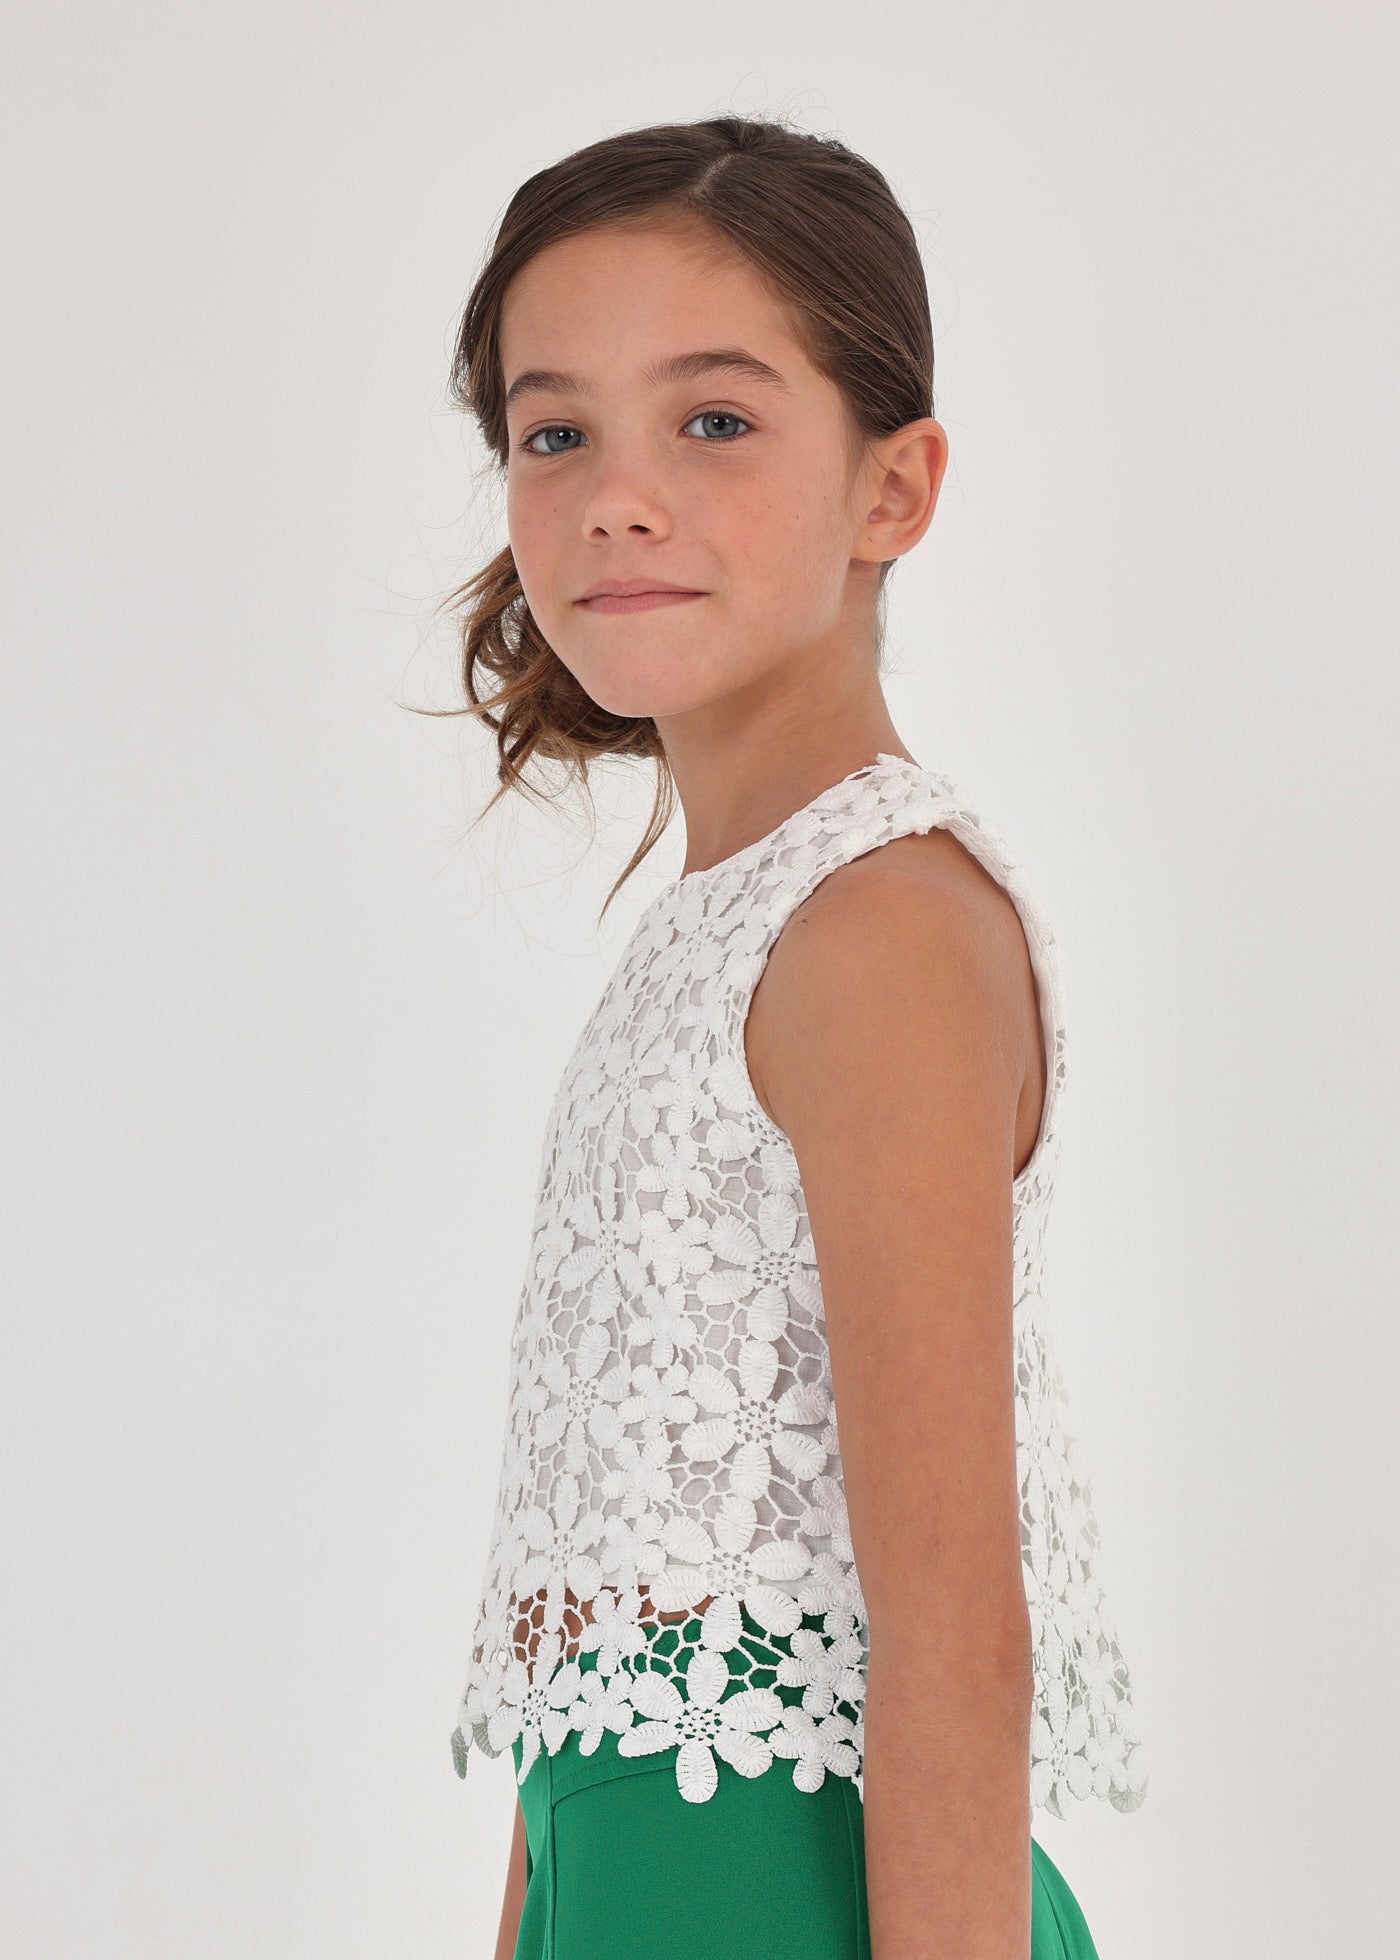 Mayoral Junior Tank Top w/Flower Lace _Off White 6064-078